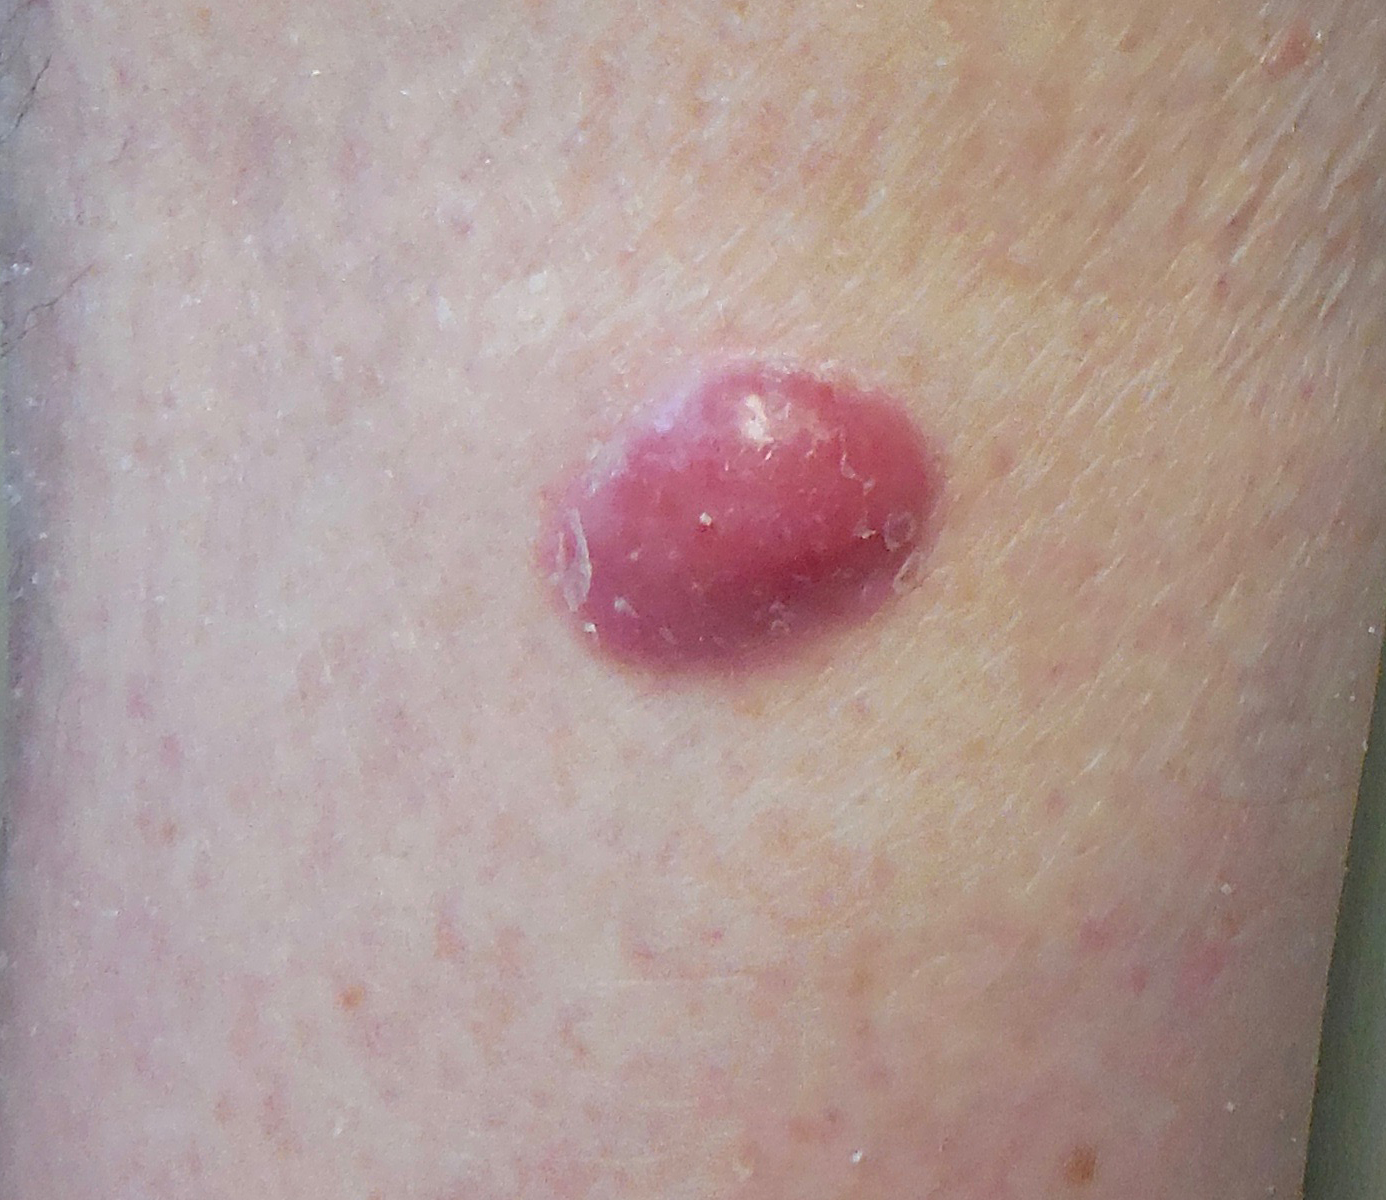 Merkel Cell Carcinoma Warning Signs And Images The Skin Cancer